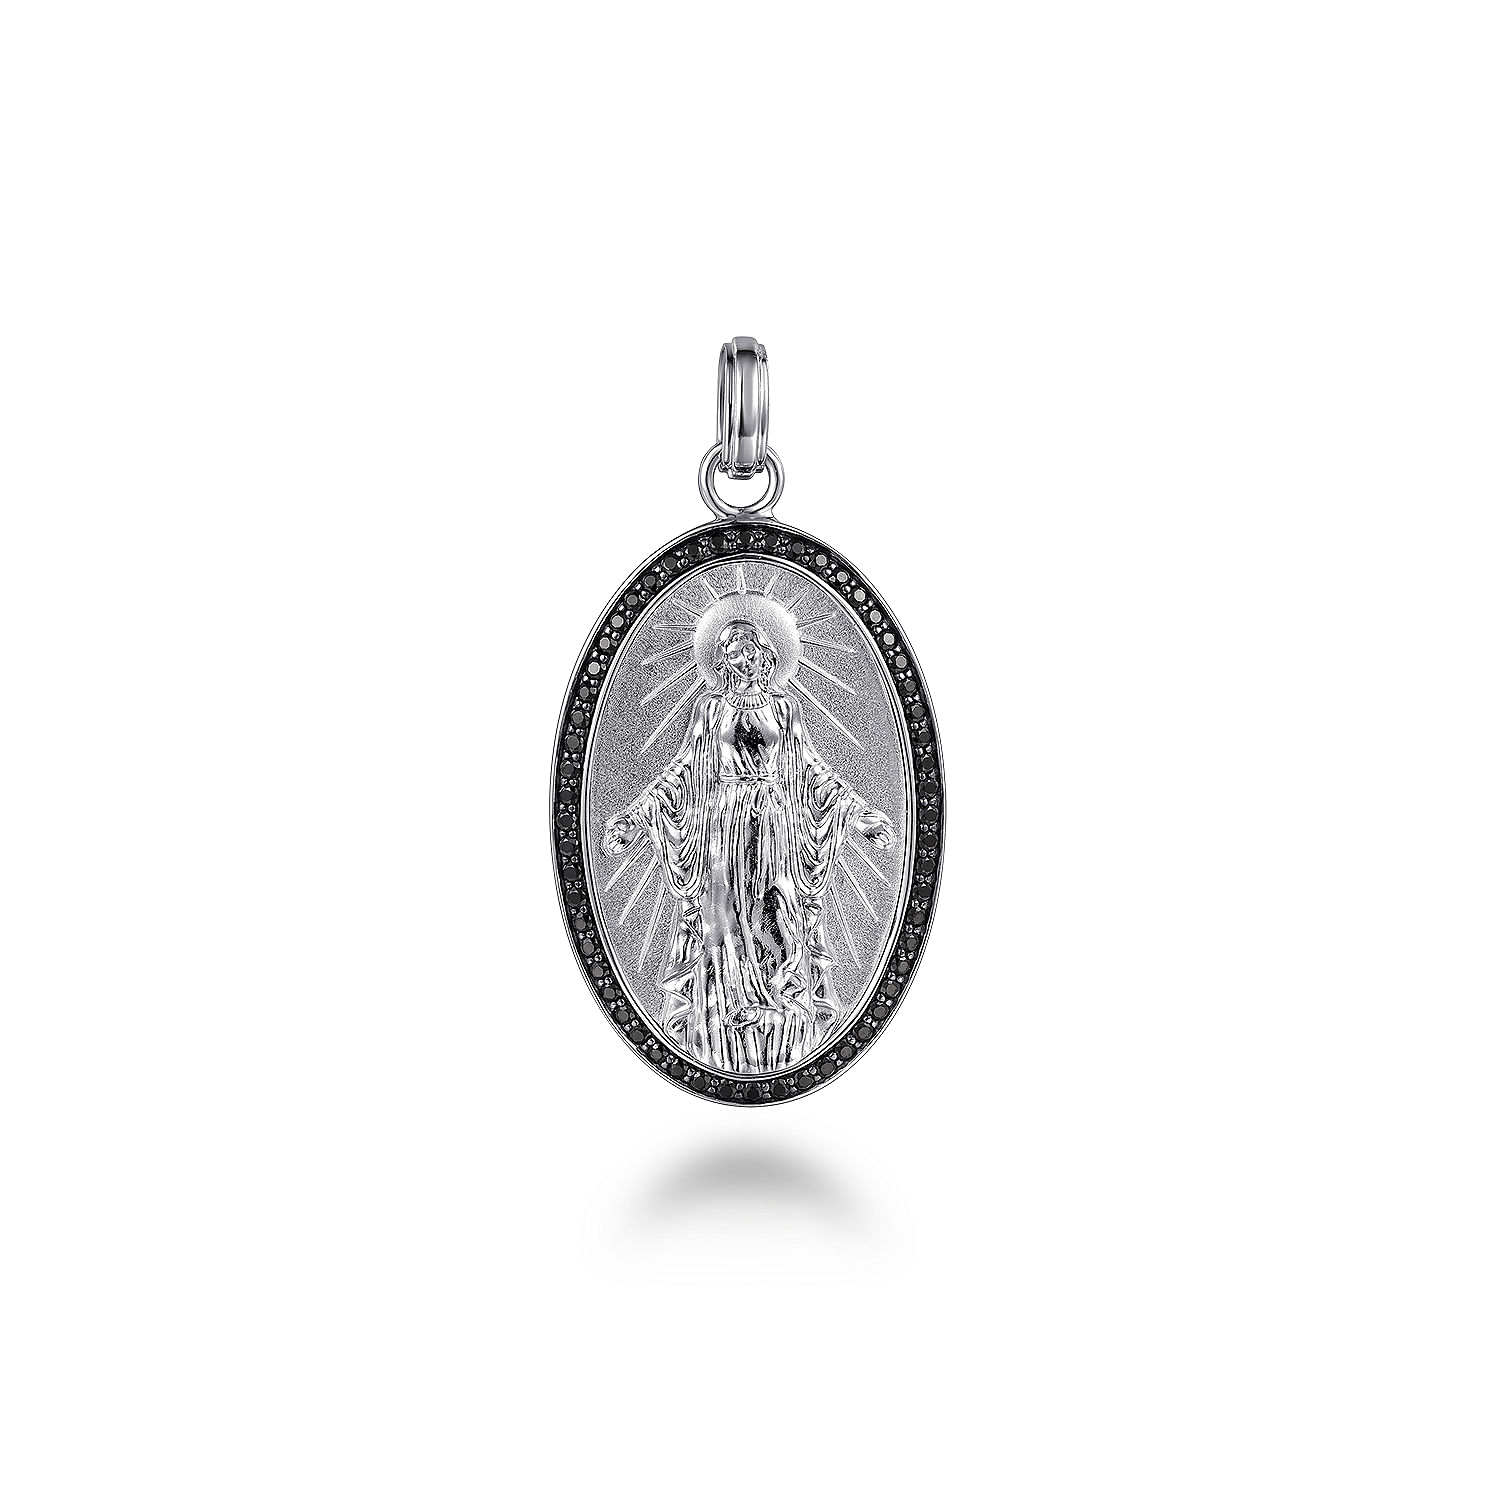 Oval 925 Sterling Silver Virgin Mary Pendant with Black Spinel Frame